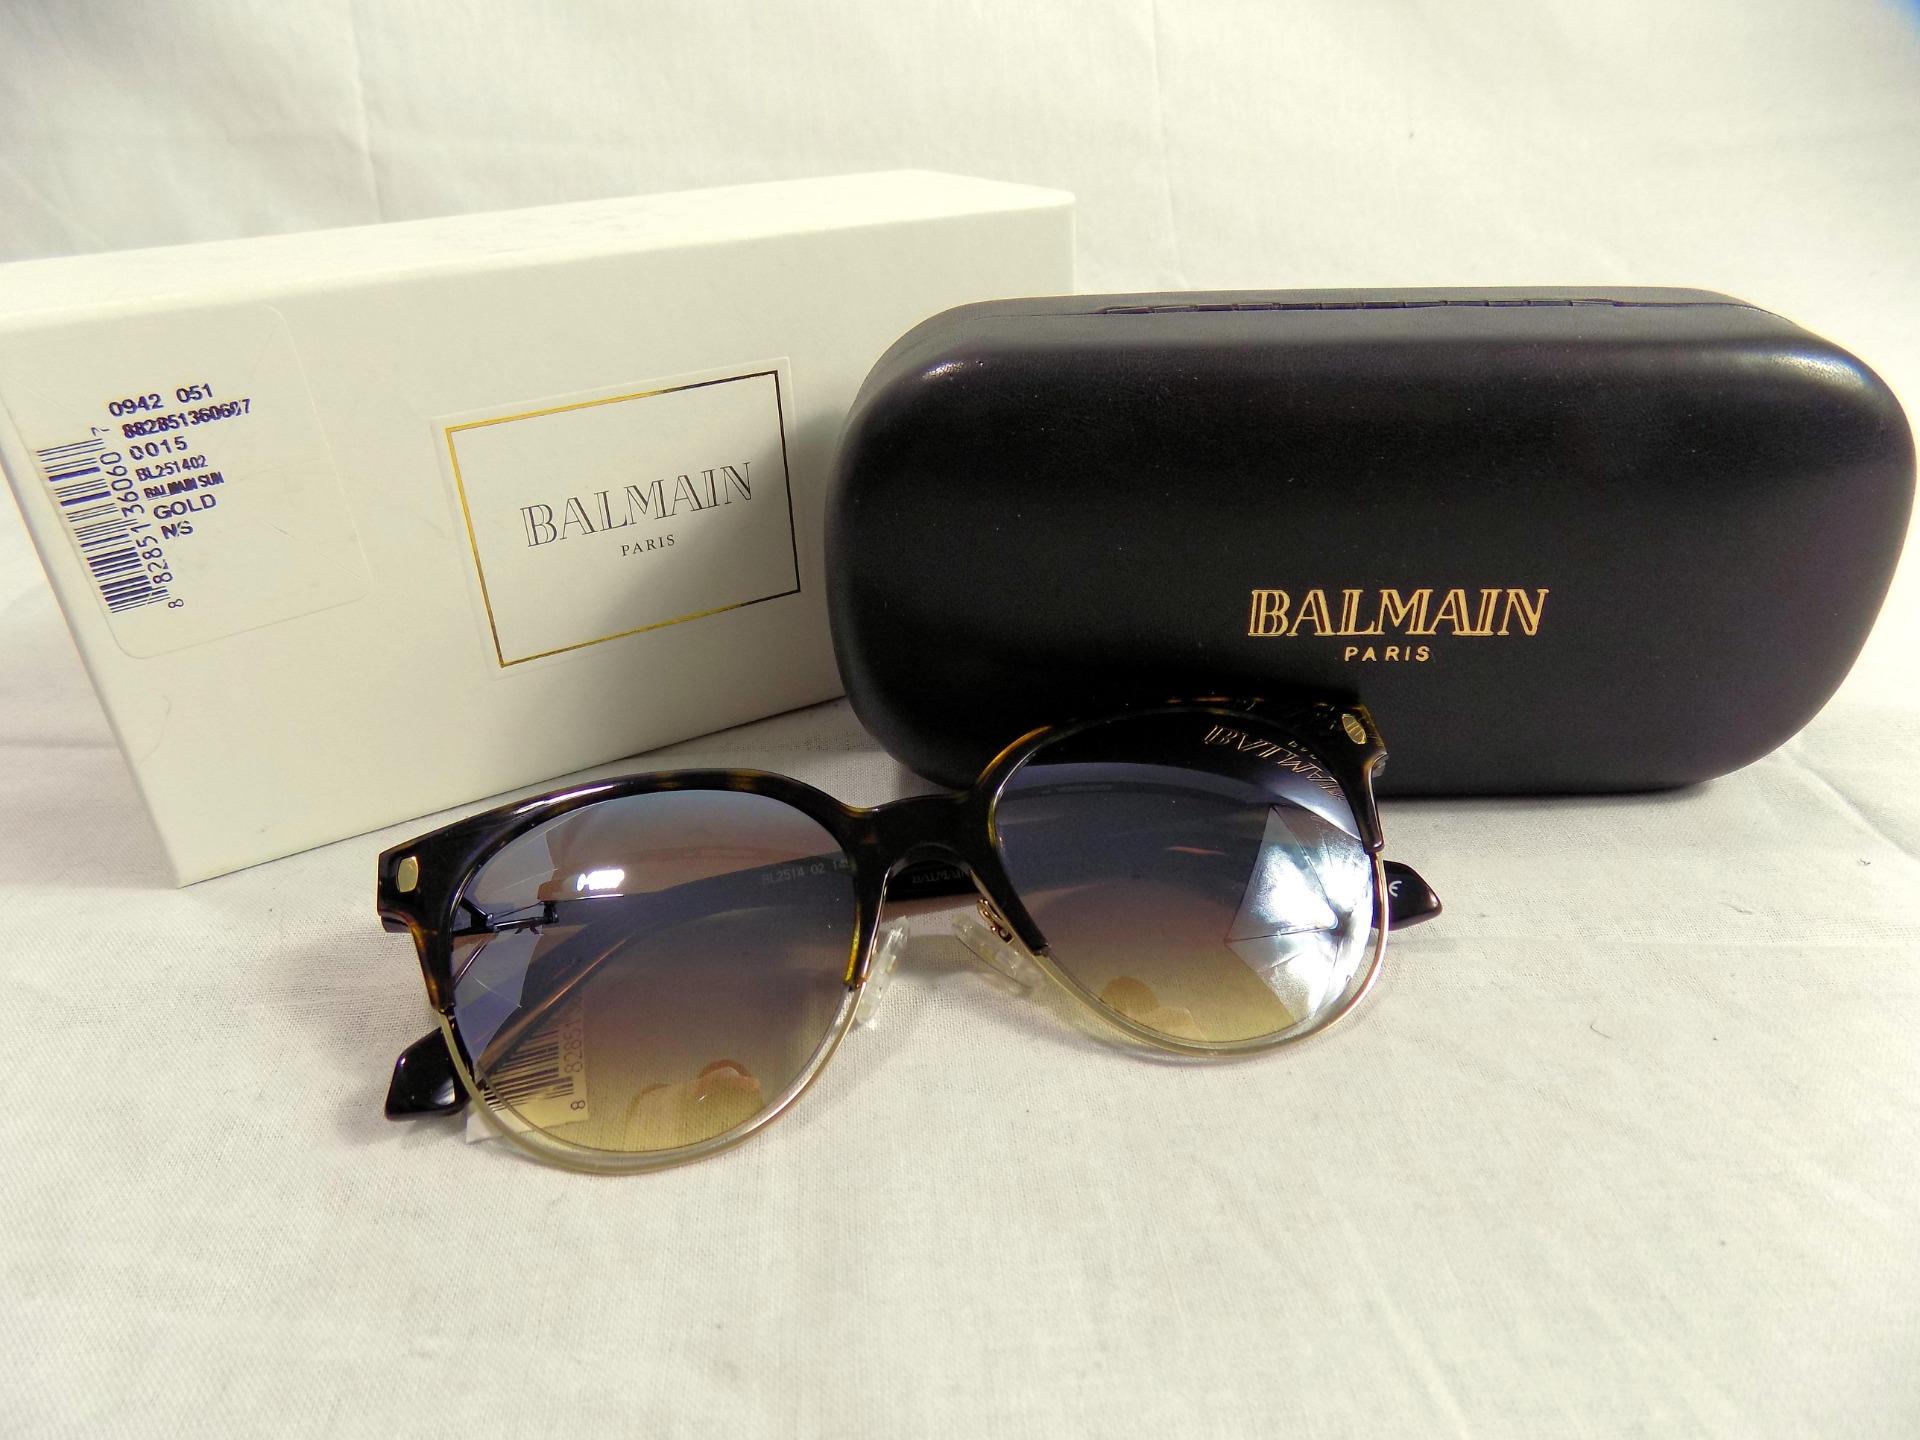 Click Images To Enlarge - Balmain 52mm Clubmaster Sunglasses , HD Wallpaper & Backgrounds